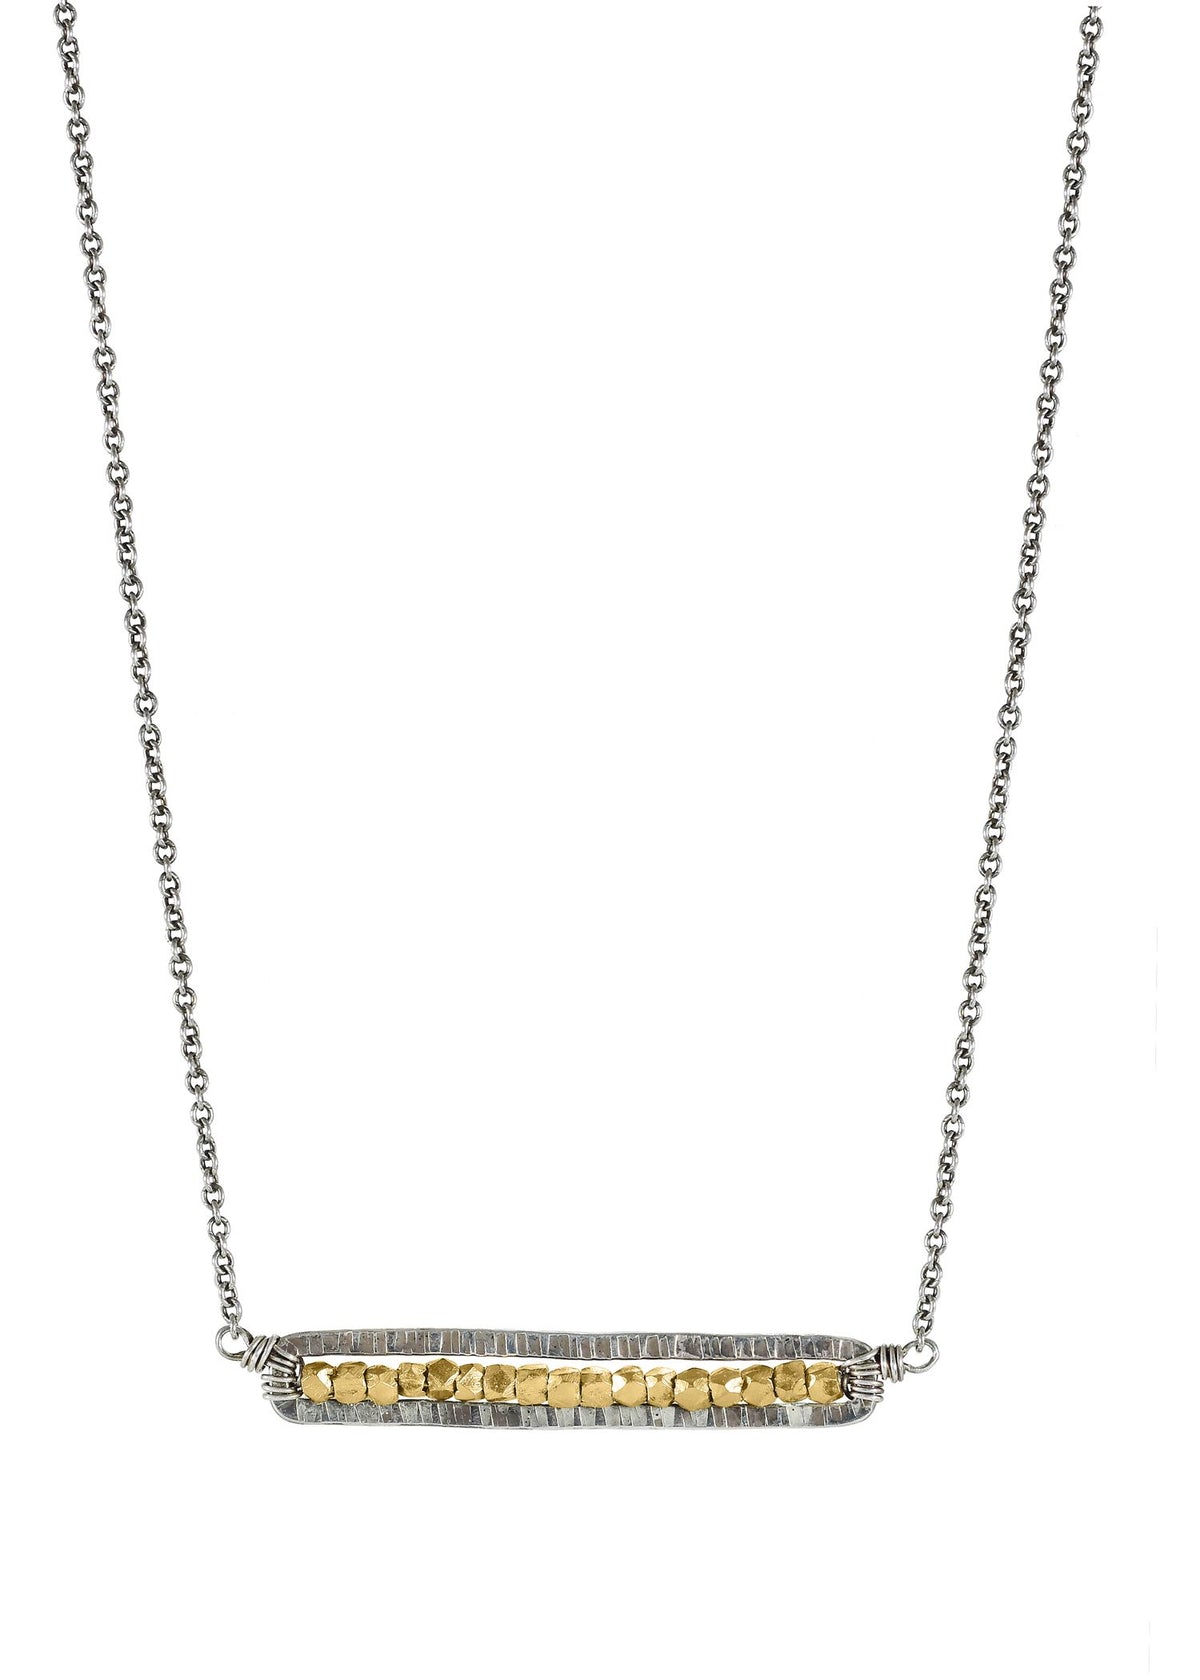 14k gold fill 14k gold vermeil on sterling silver Sterling silver Golden seed beads Mixed metal  Necklace measures 16” in length Pendant measures 3/16” in length and 1-1/8” in width Handmade in our Los Angeles studio